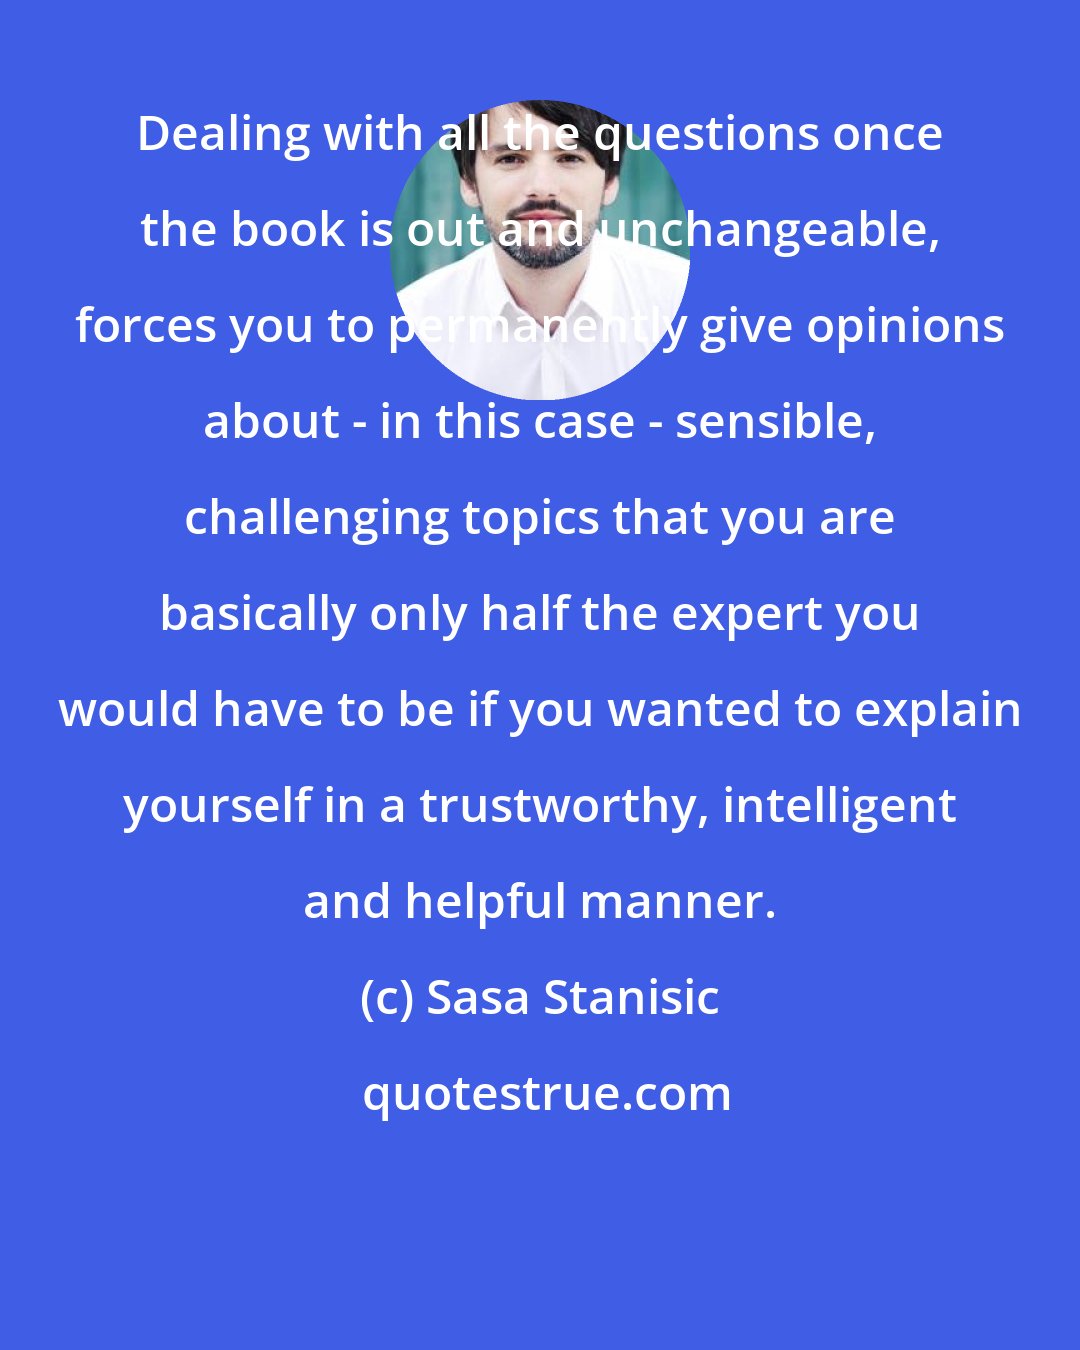 Sasa Stanisic: Dealing with all the questions once the book is out and unchangeable, forces you to permanently give opinions about - in this case - sensible, challenging topics that you are basically only half the expert you would have to be if you wanted to explain yourself in a trustworthy, intelligent and helpful manner.